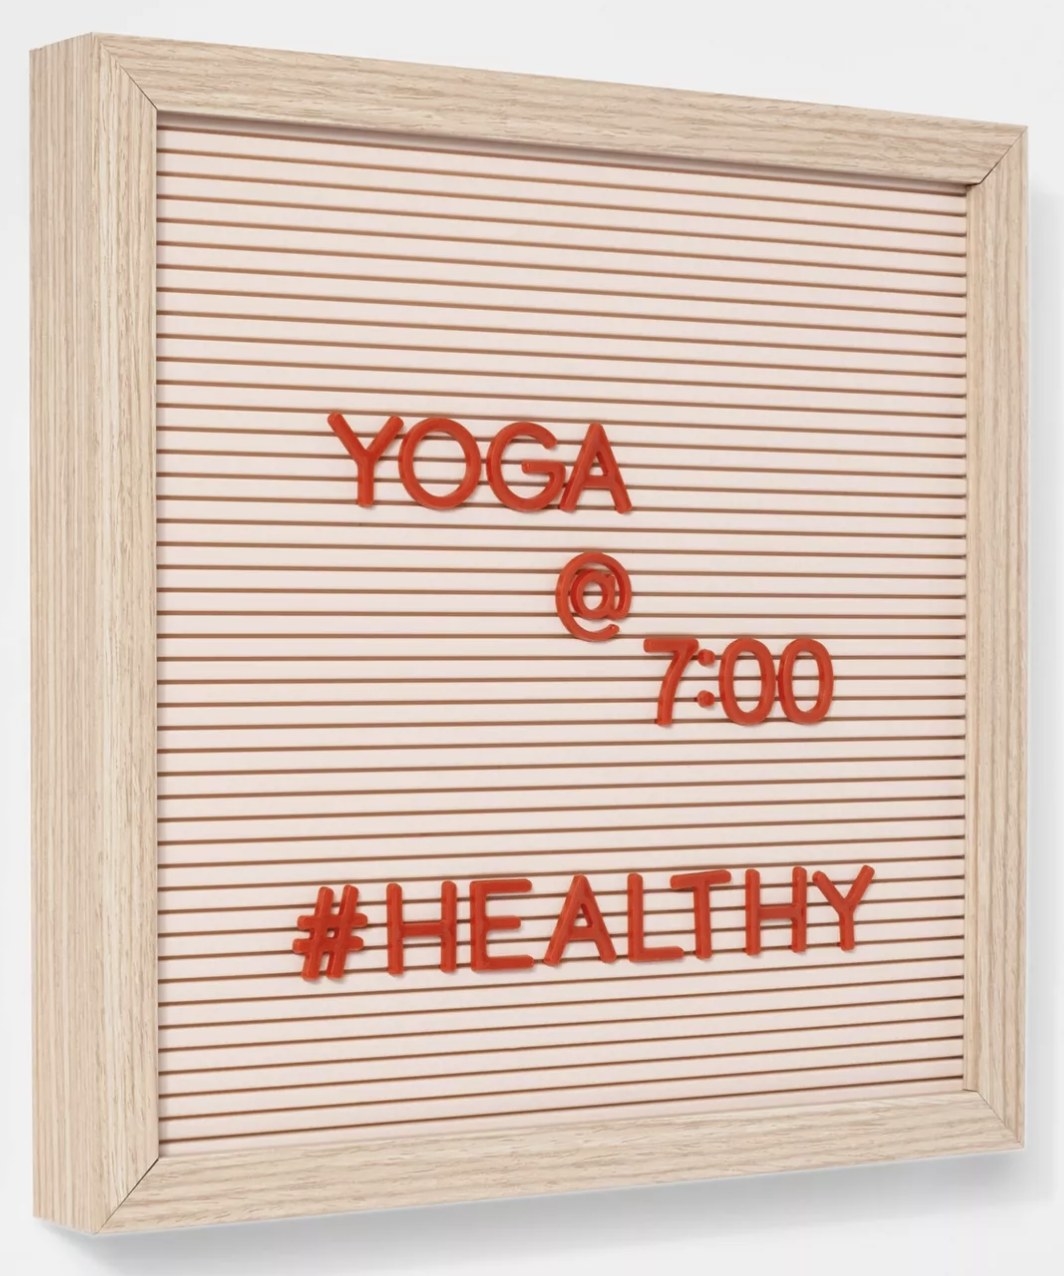 The pink letterboard displays &quot;Yoga @ 7:00 #Healthy&quot; 